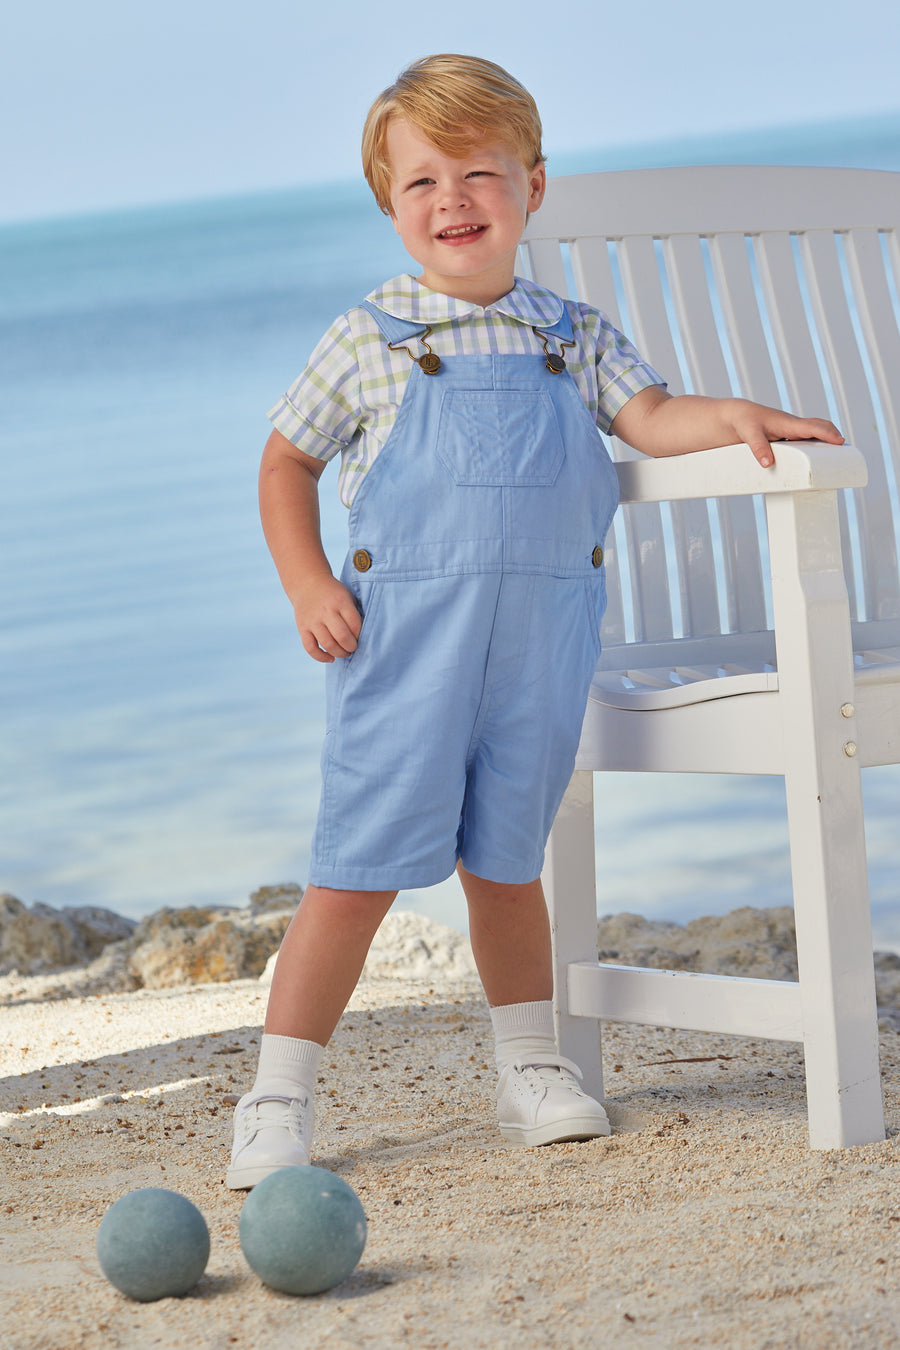 Little English traditional children's clothing, light blue twill short overall for toddlers for spring with brass hardware